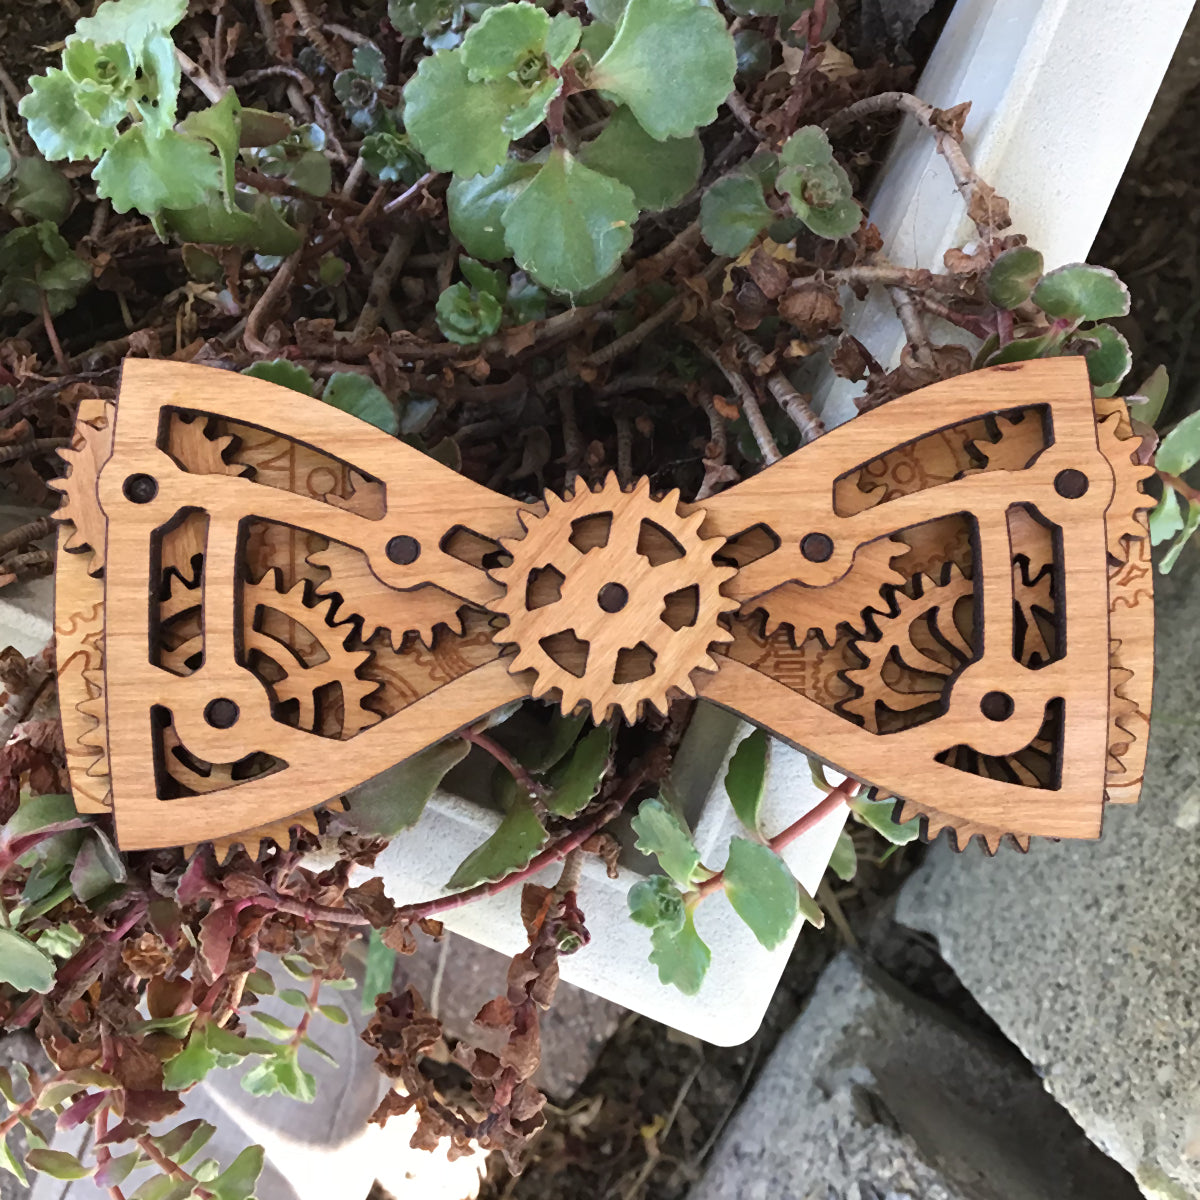 Maximus - Cherry Wood Moving Gear Bow Tie